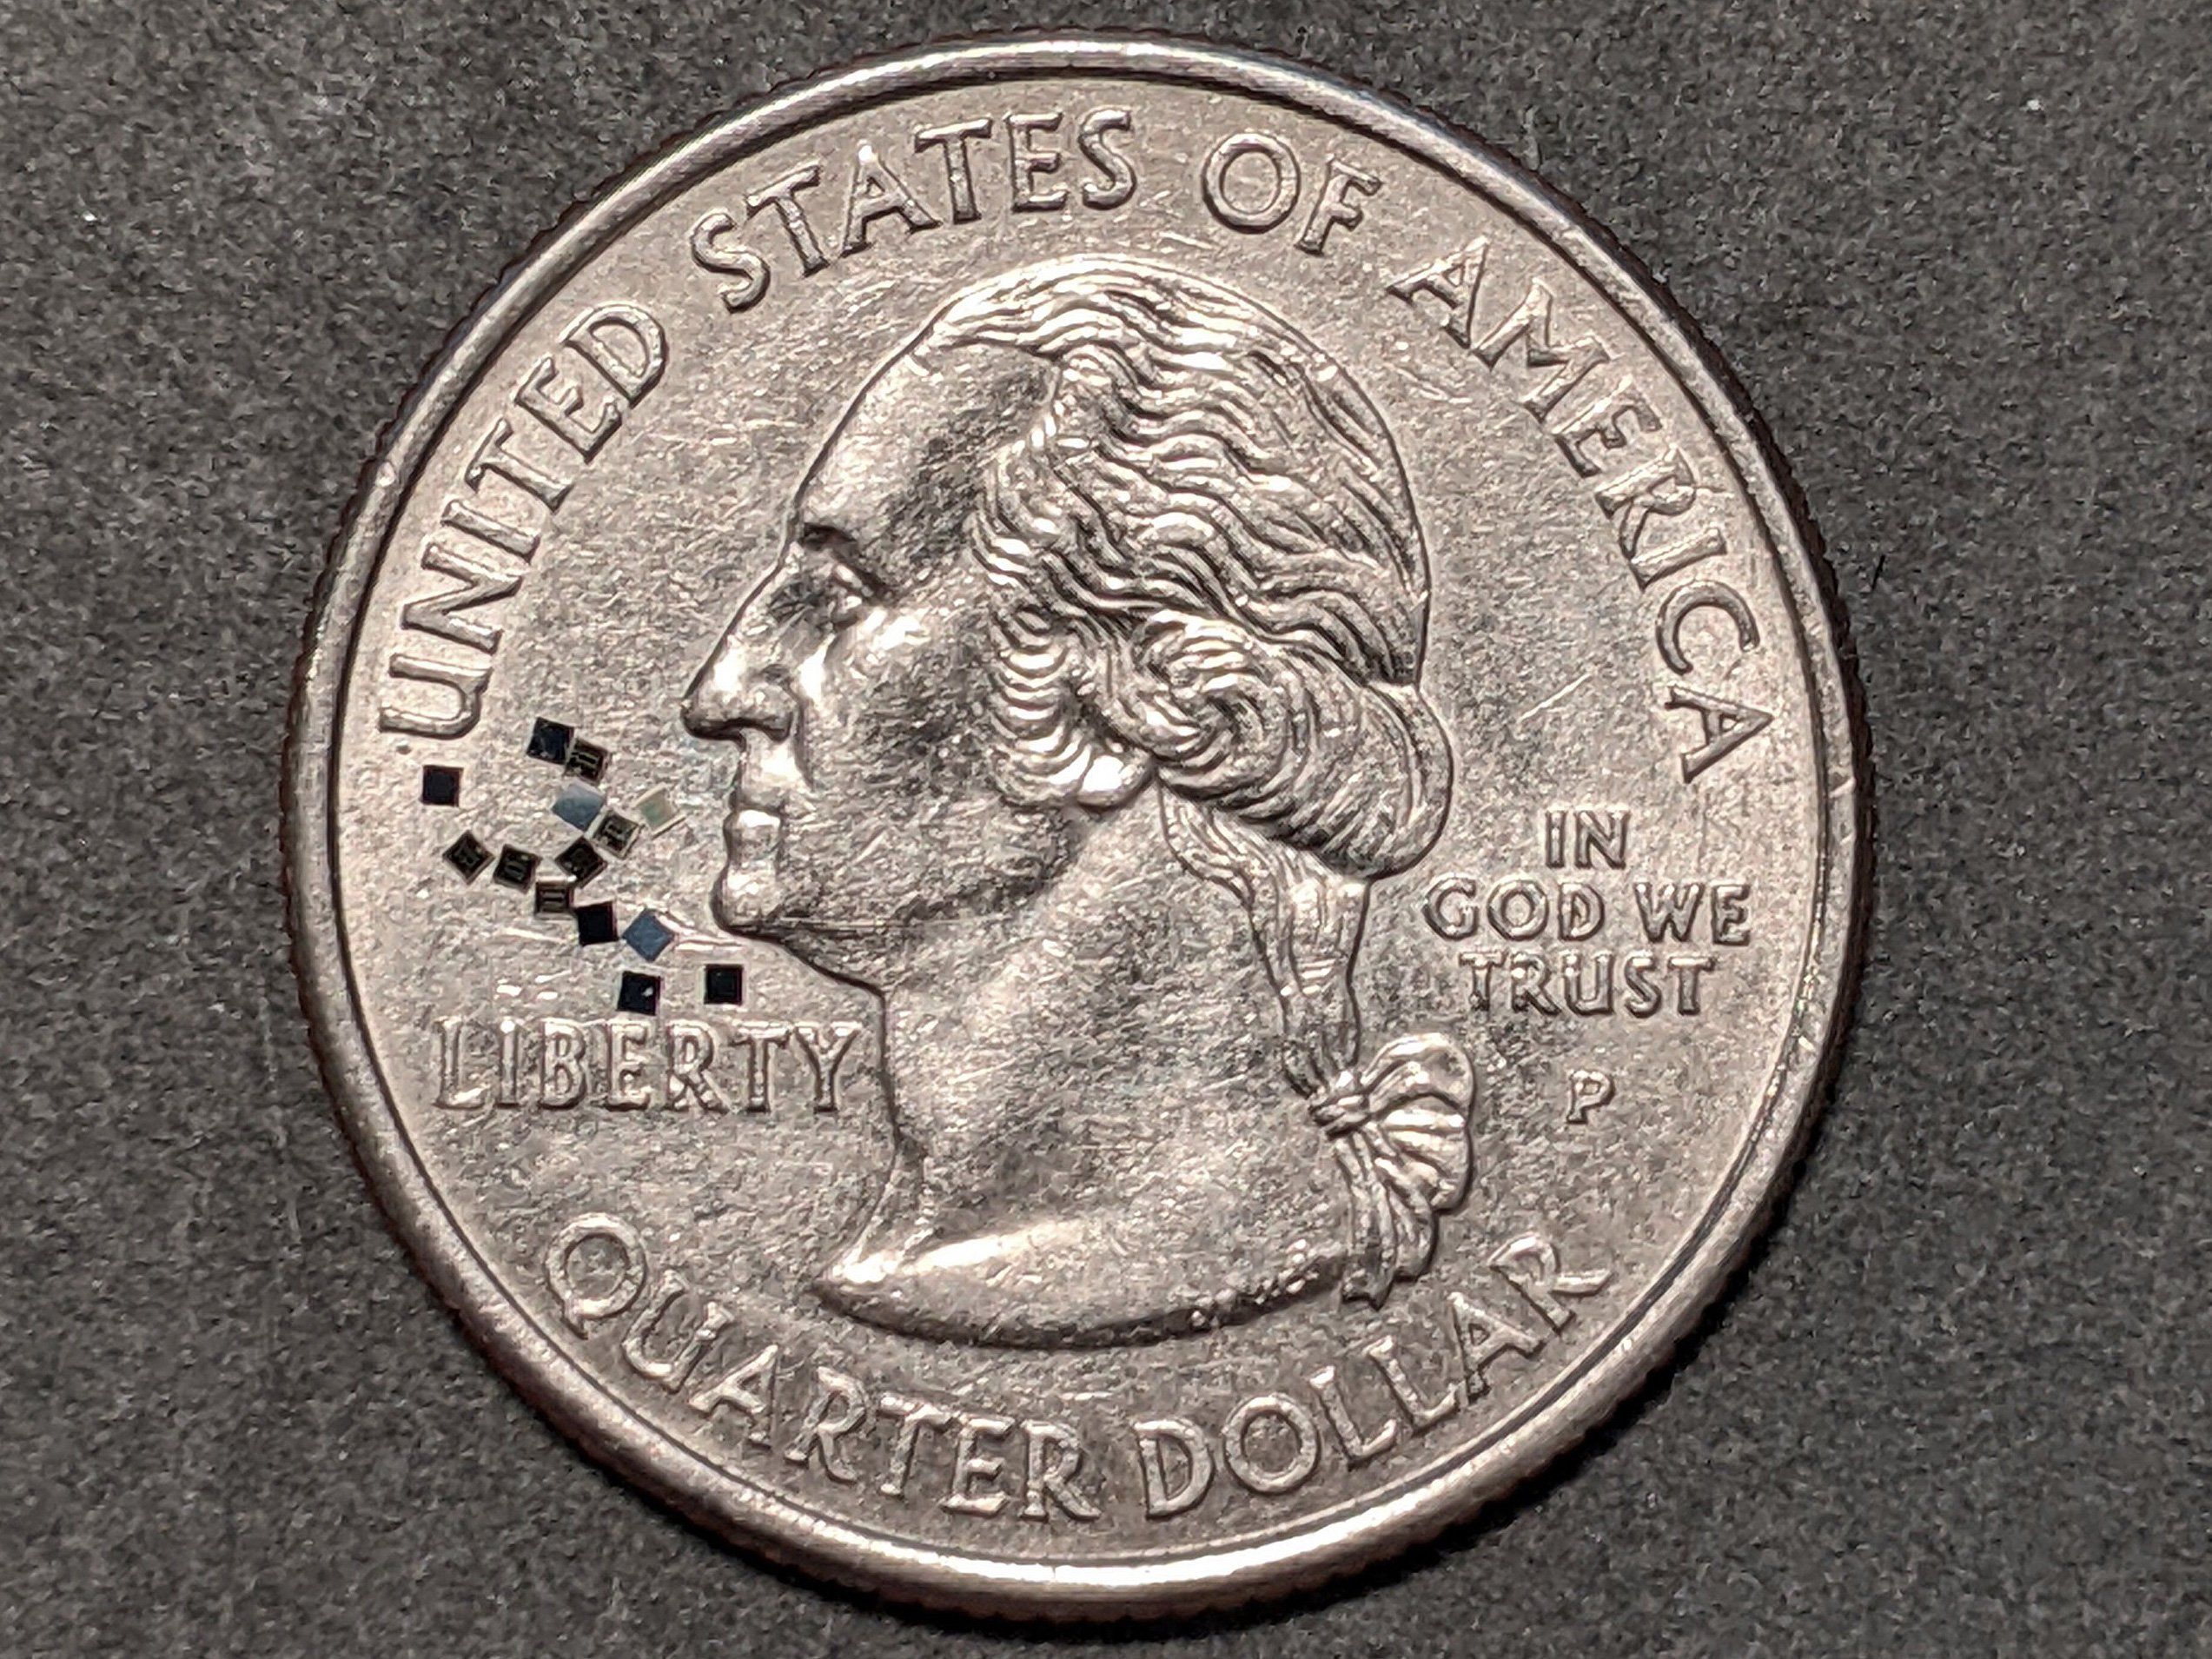 little black squares on top of a silver quarter coin